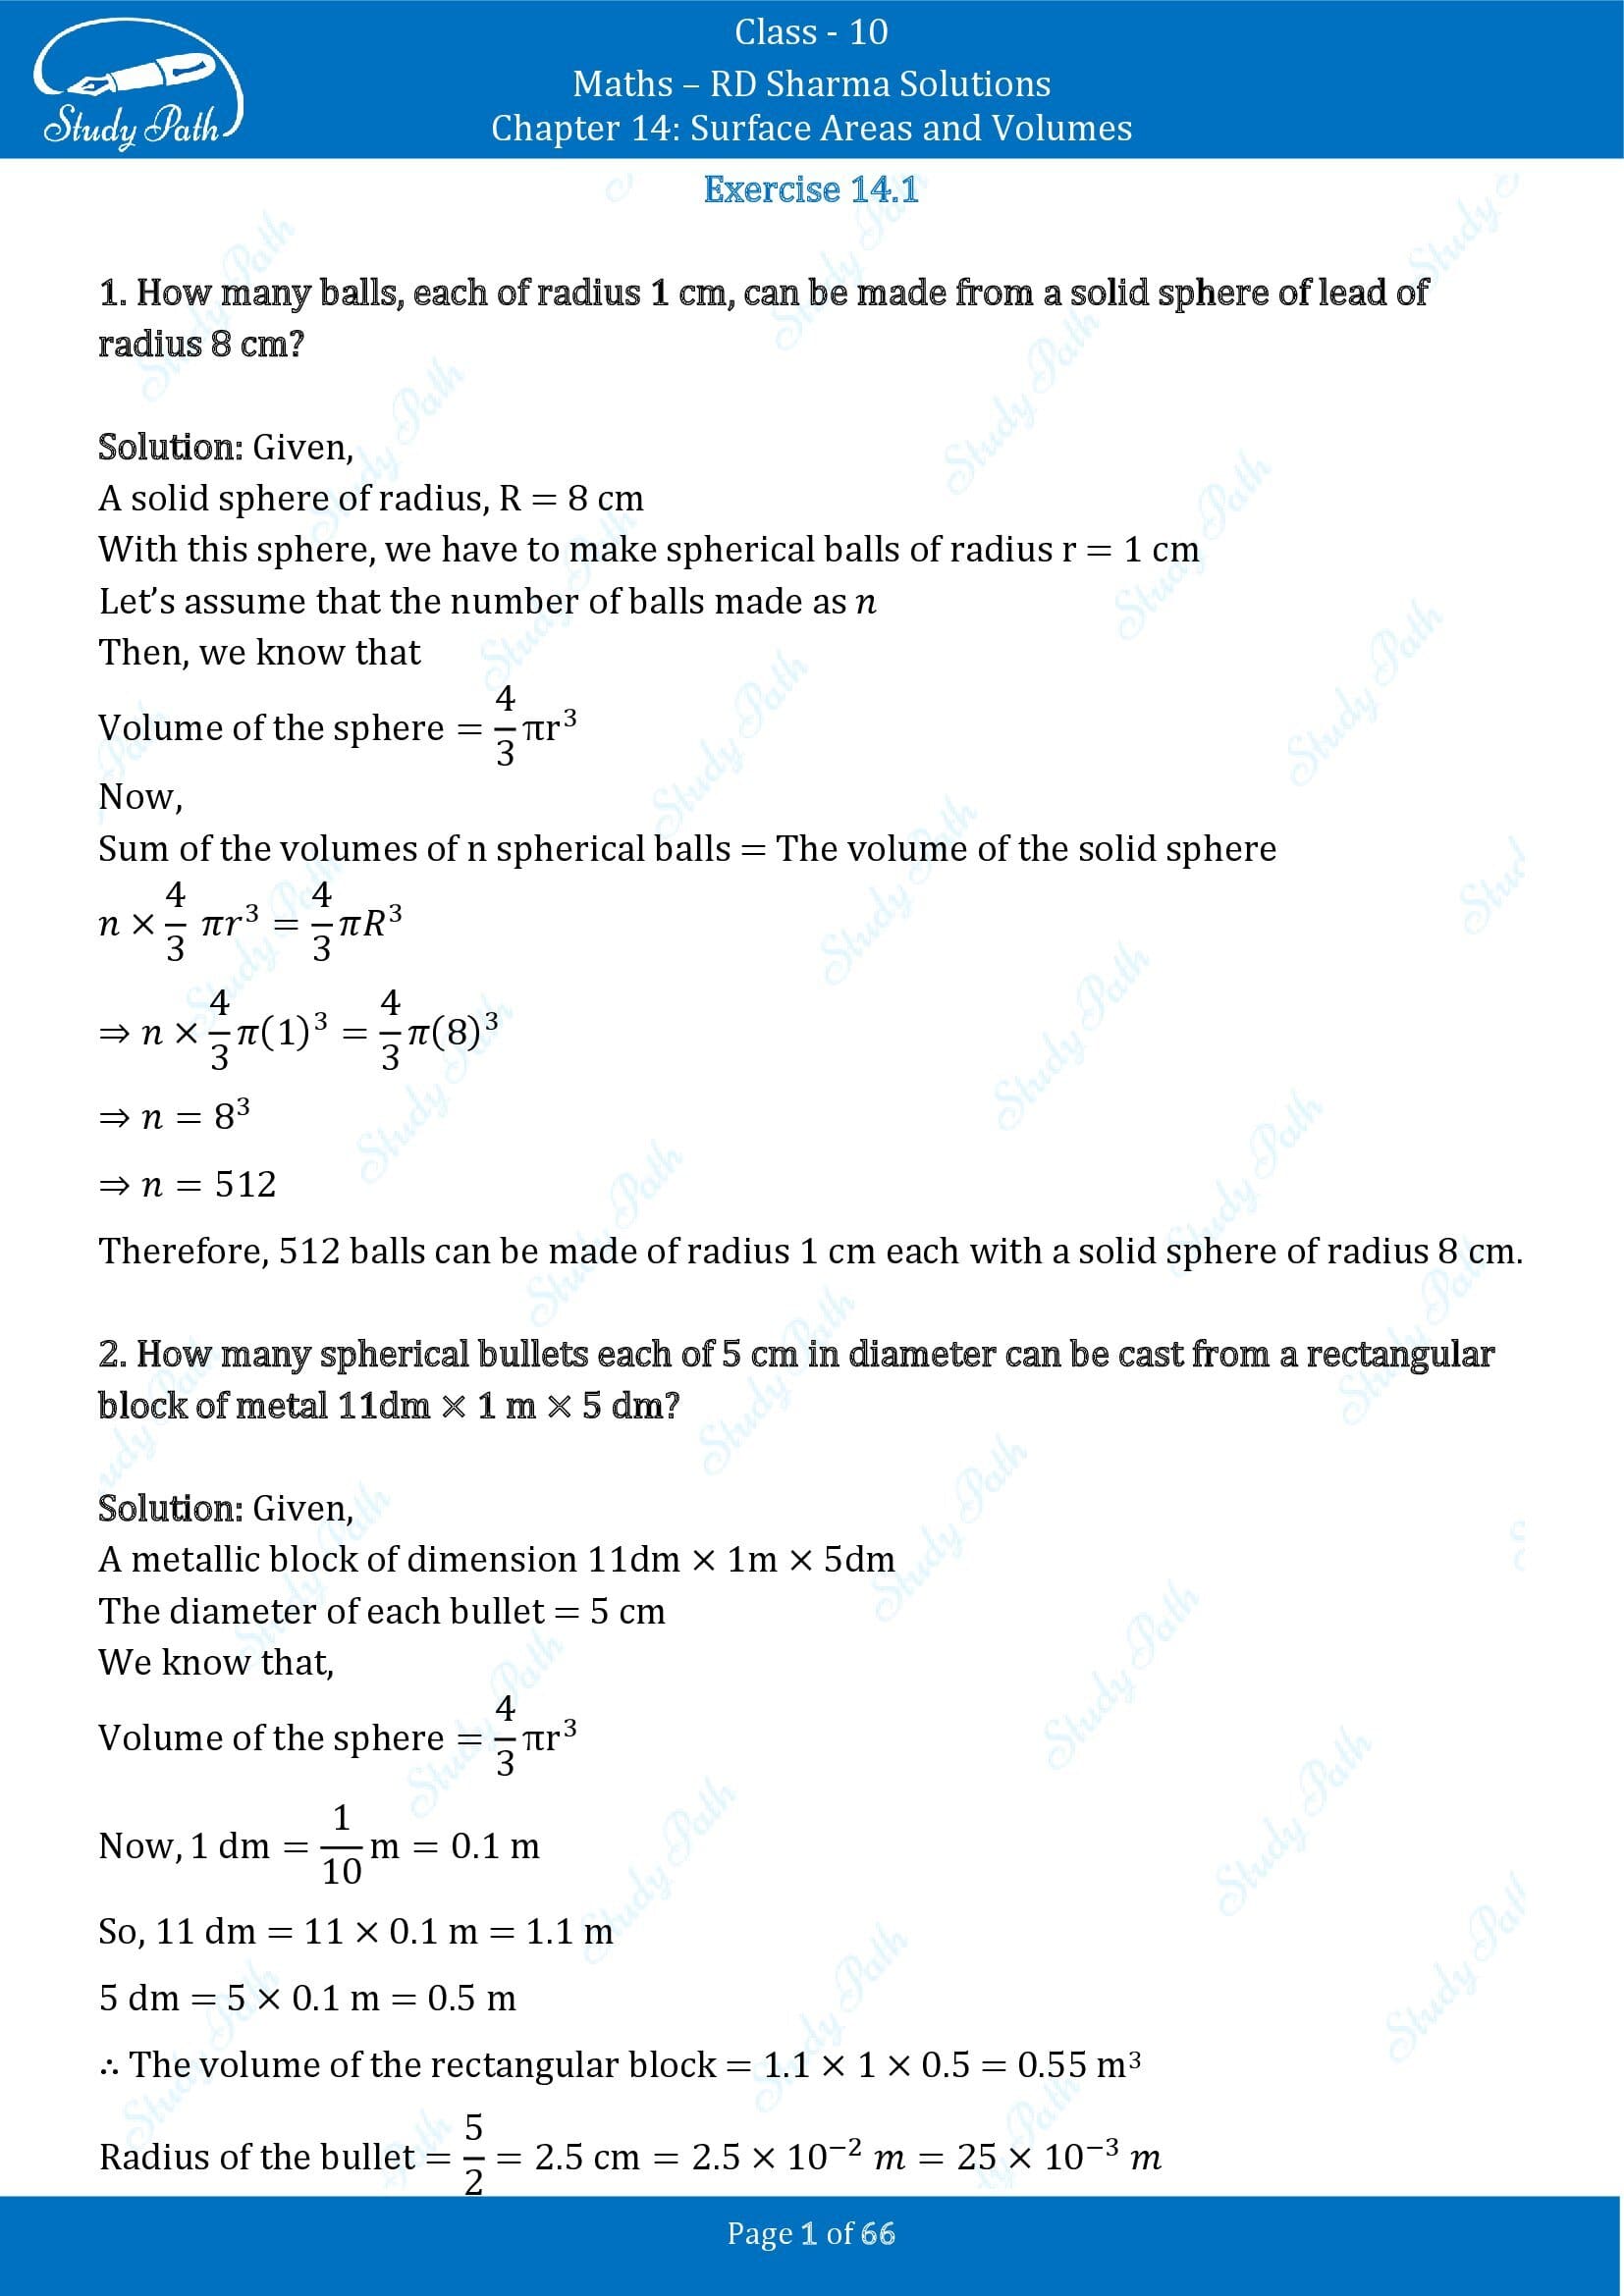 RD Sharma Solutions Class 10 Chapter 14 Surface Areas and Volumes Exercise 14.1 00001